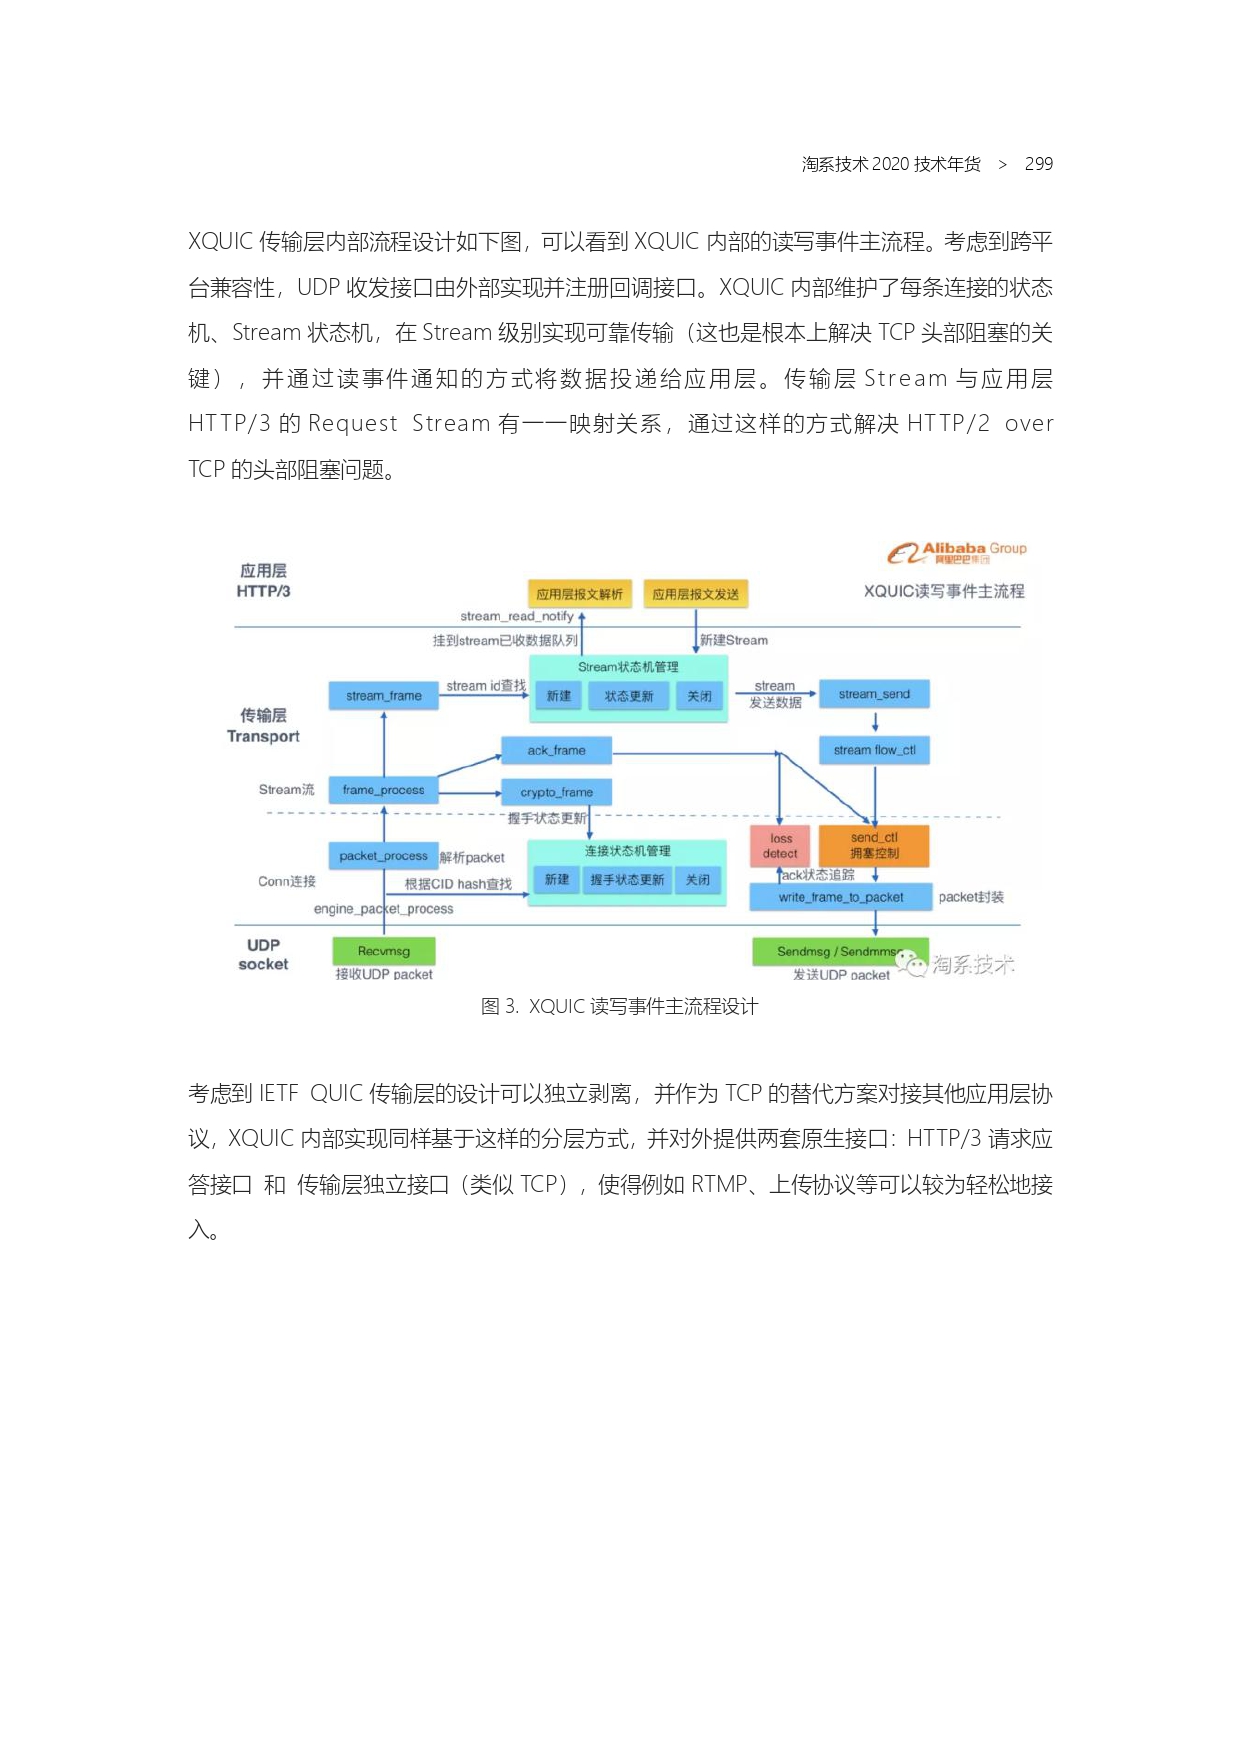 The Complete Works of Tao Technology 2020-1-570_page-0299.jpg